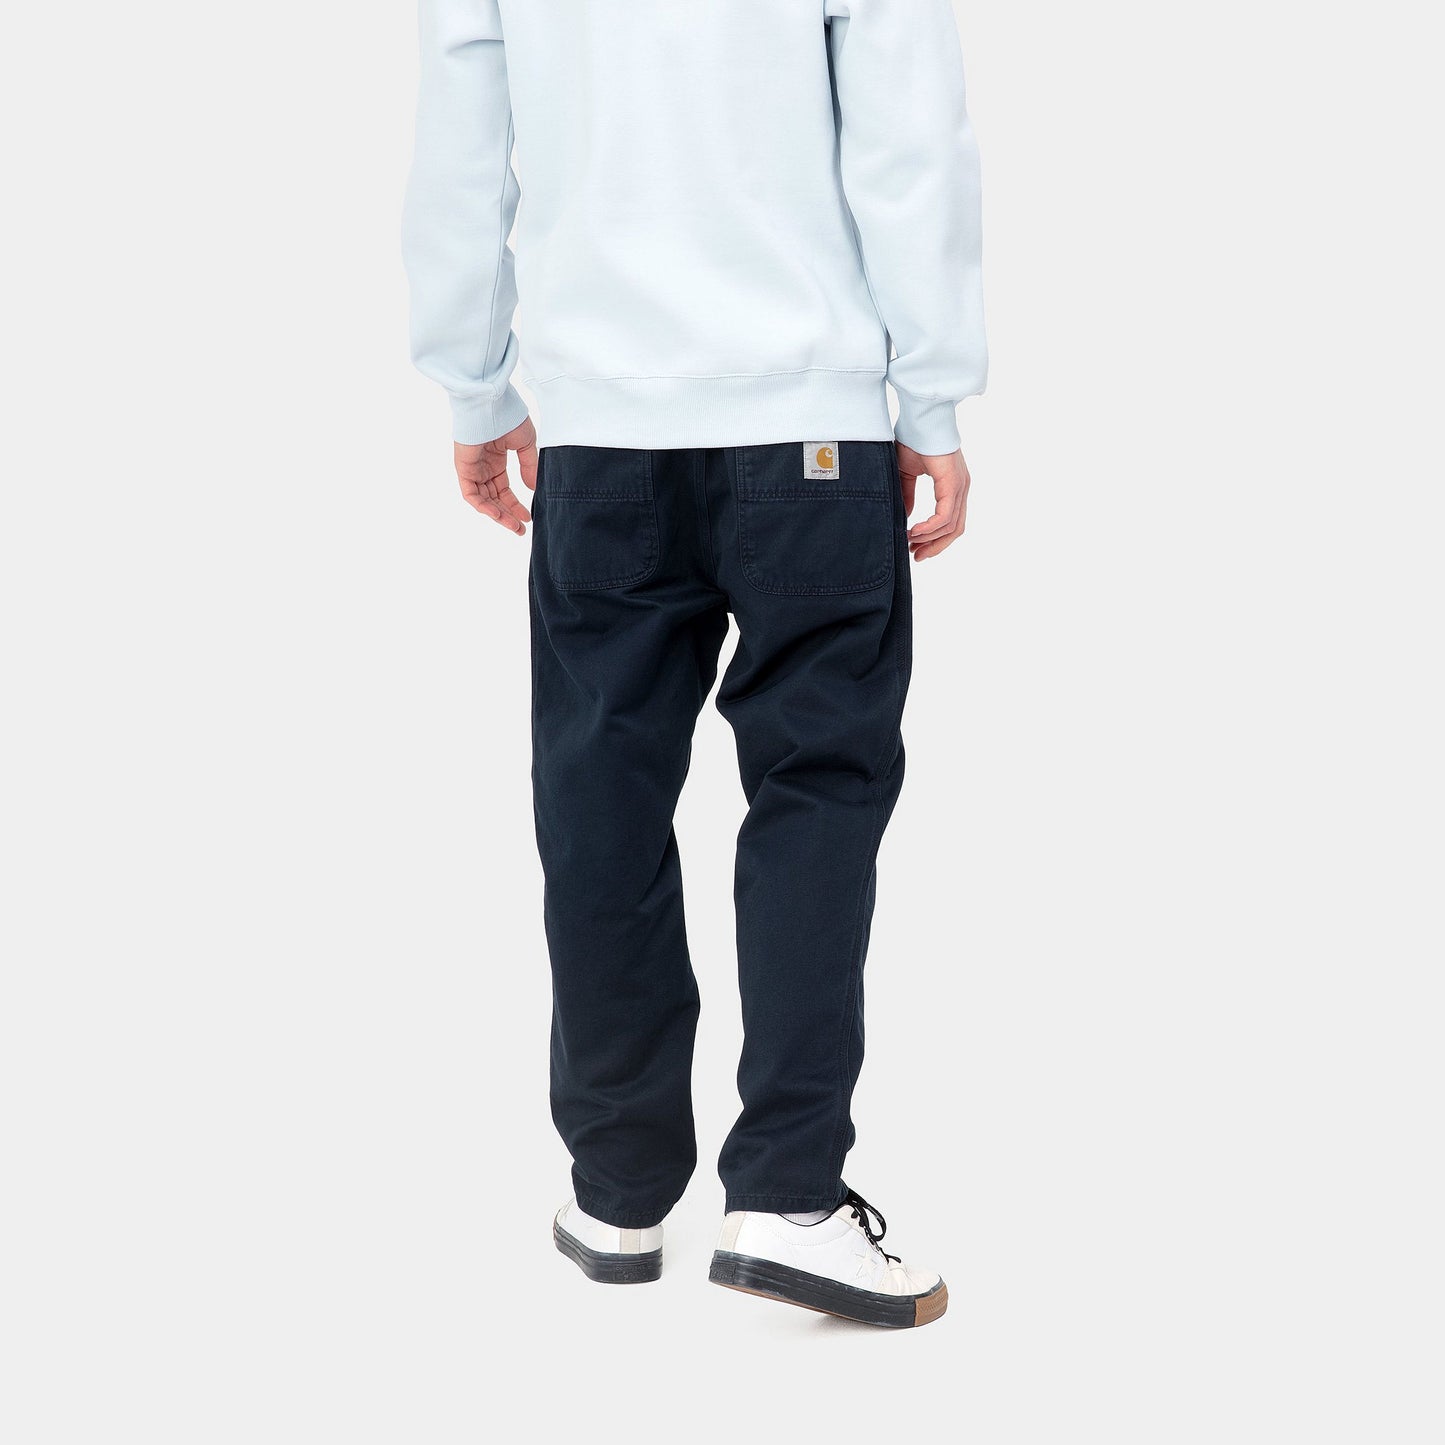 CARHARTT WIP ABBOT PANT - Atom Blue Stone Washed